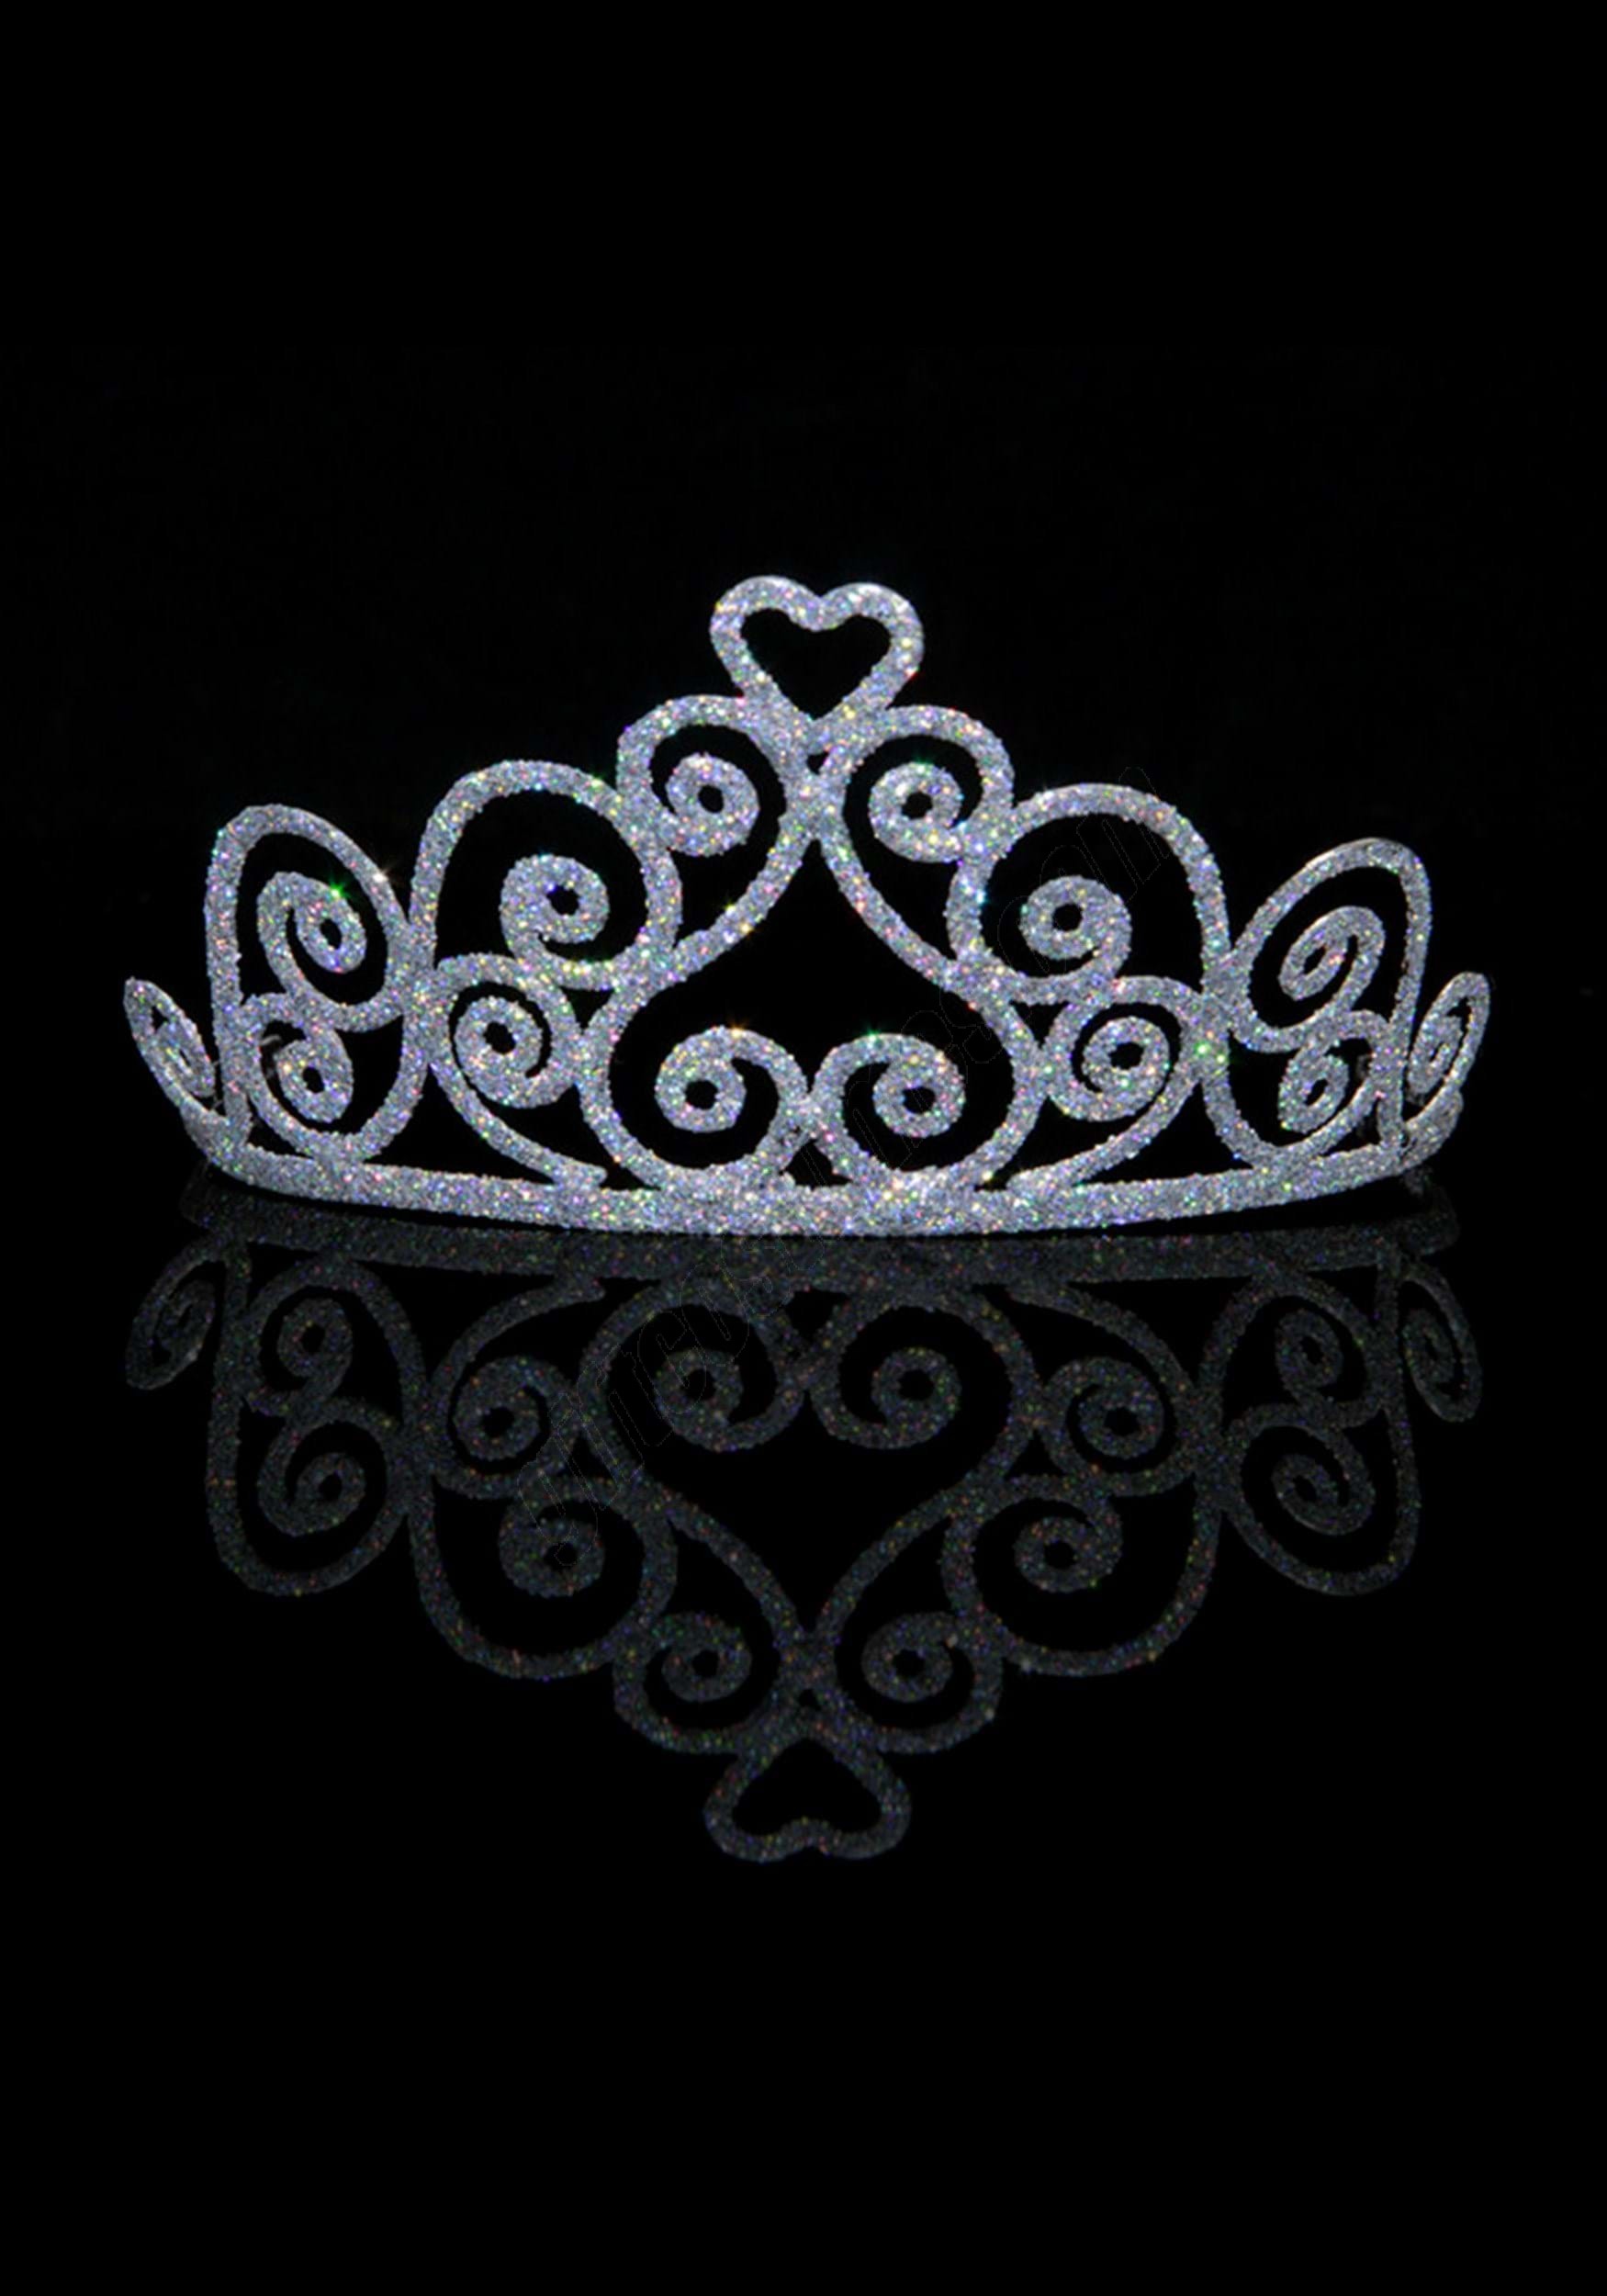 Adult Sparkle Heart Tiara Promotions - Adult Sparkle Heart Tiara Promotions